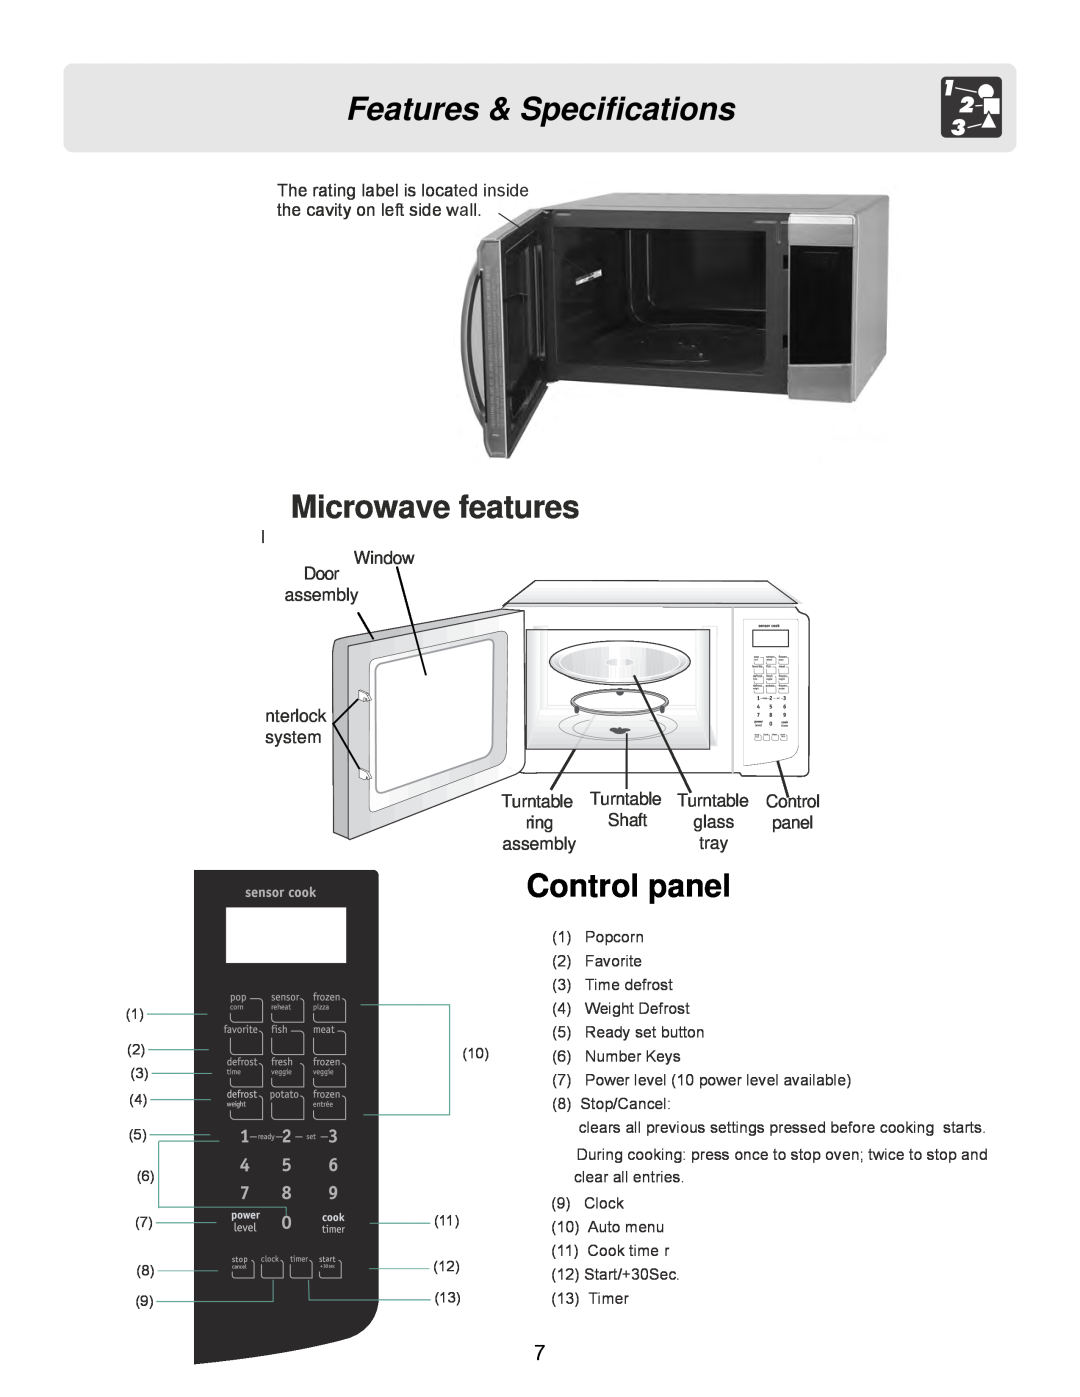 Frigidaire FFMO1611LW Features & Specifications, Control panel, Microwave features, I Window Door assembly nterlock system 